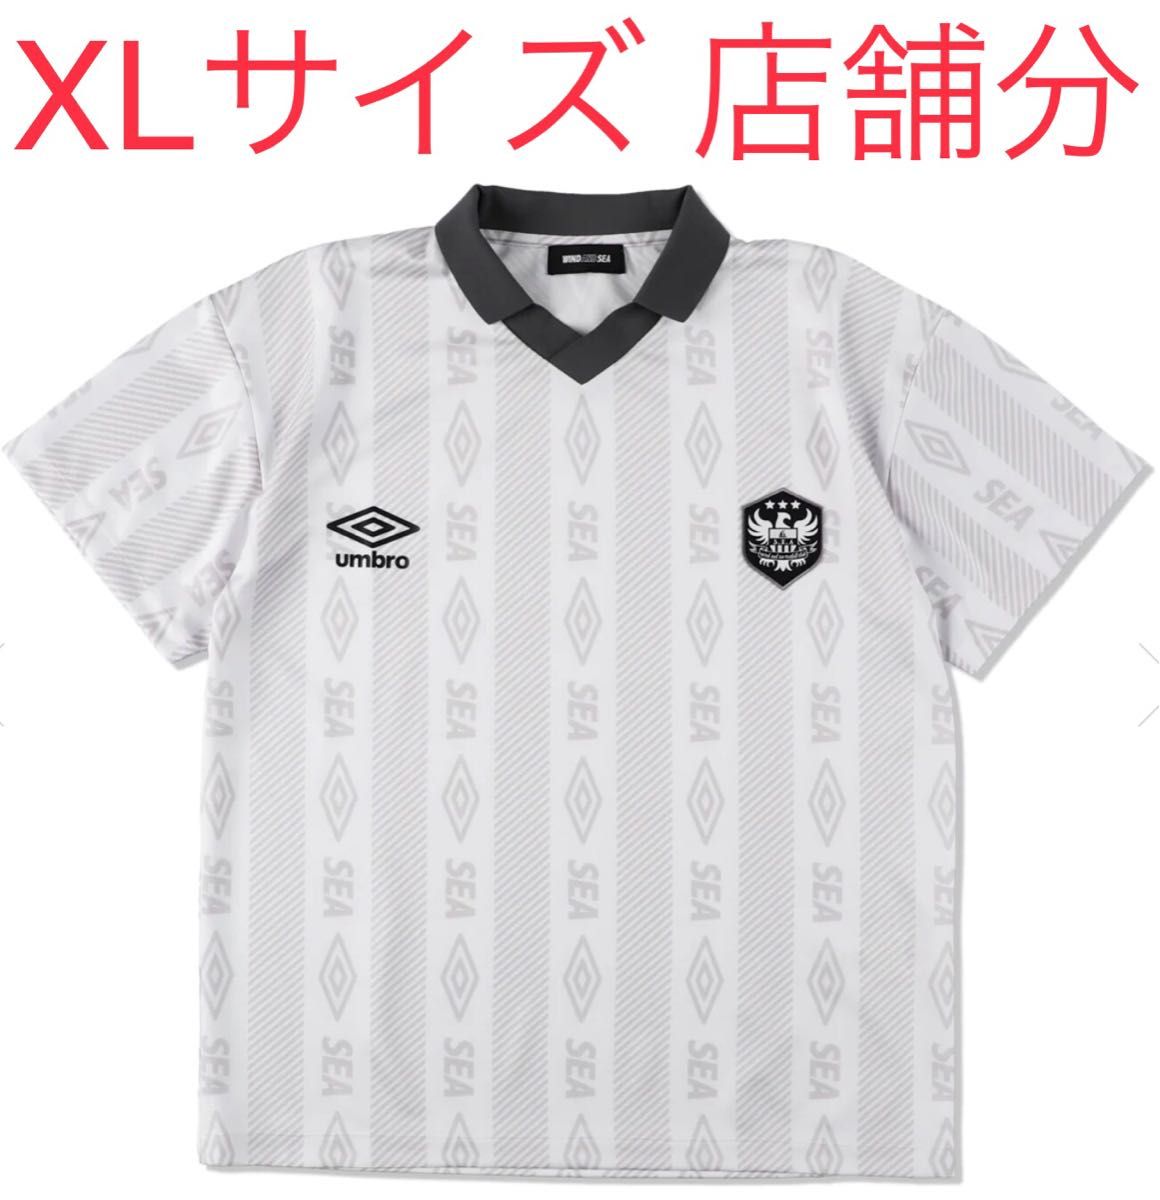 WIND AND SEA UMBRO × WDS S/S GAME SHIRT